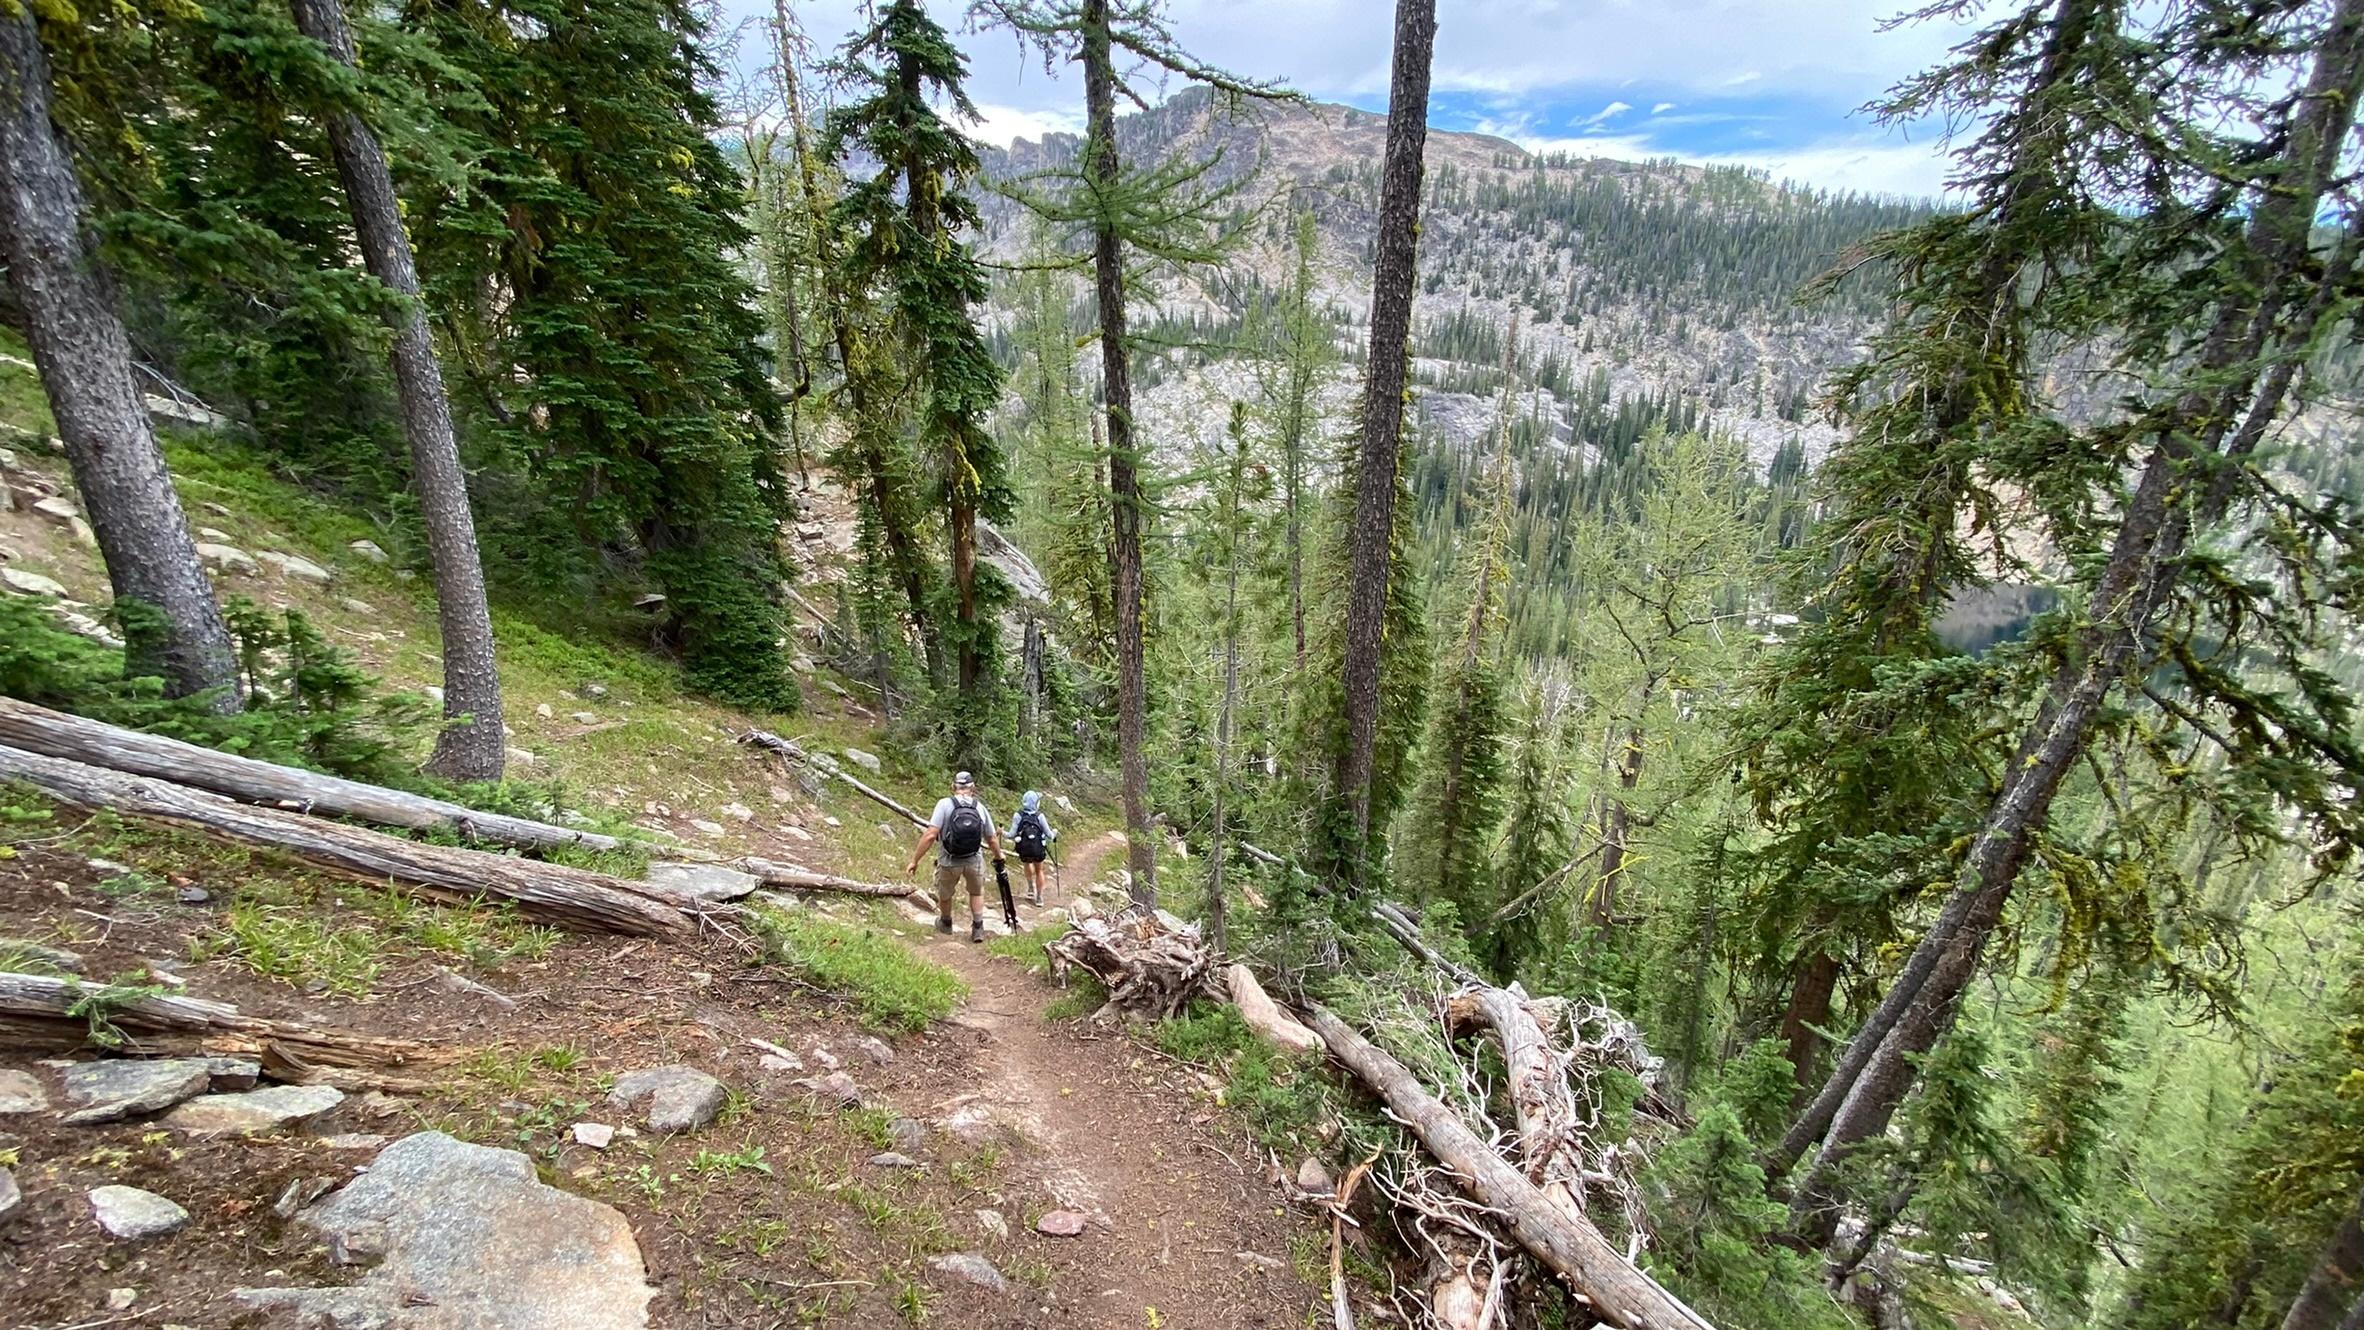 Two hikers descending the mountain trail